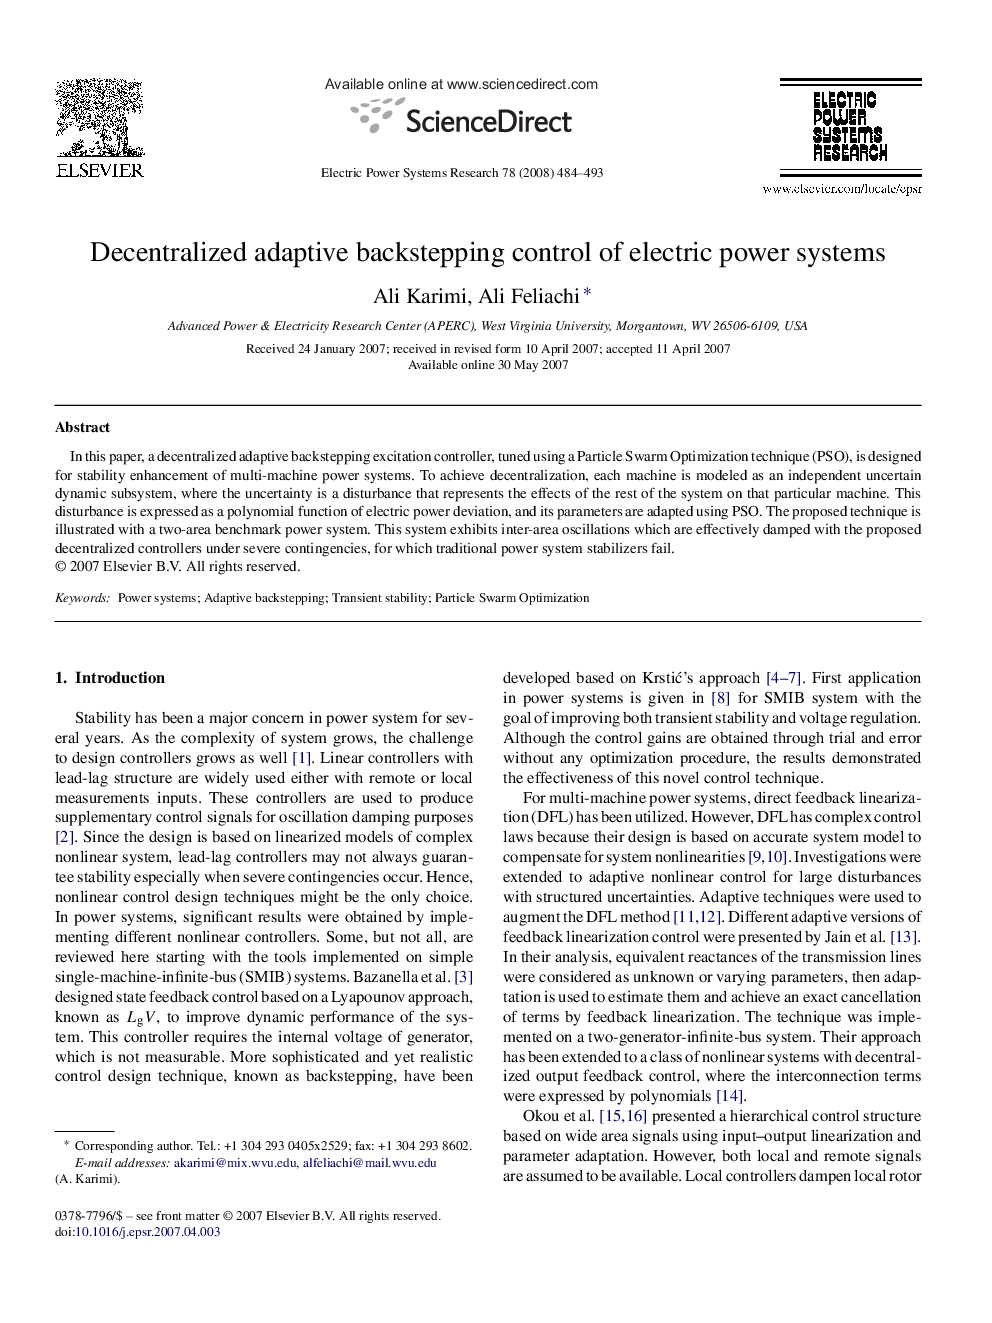 Decentralized adaptive backstepping control of electric power systems